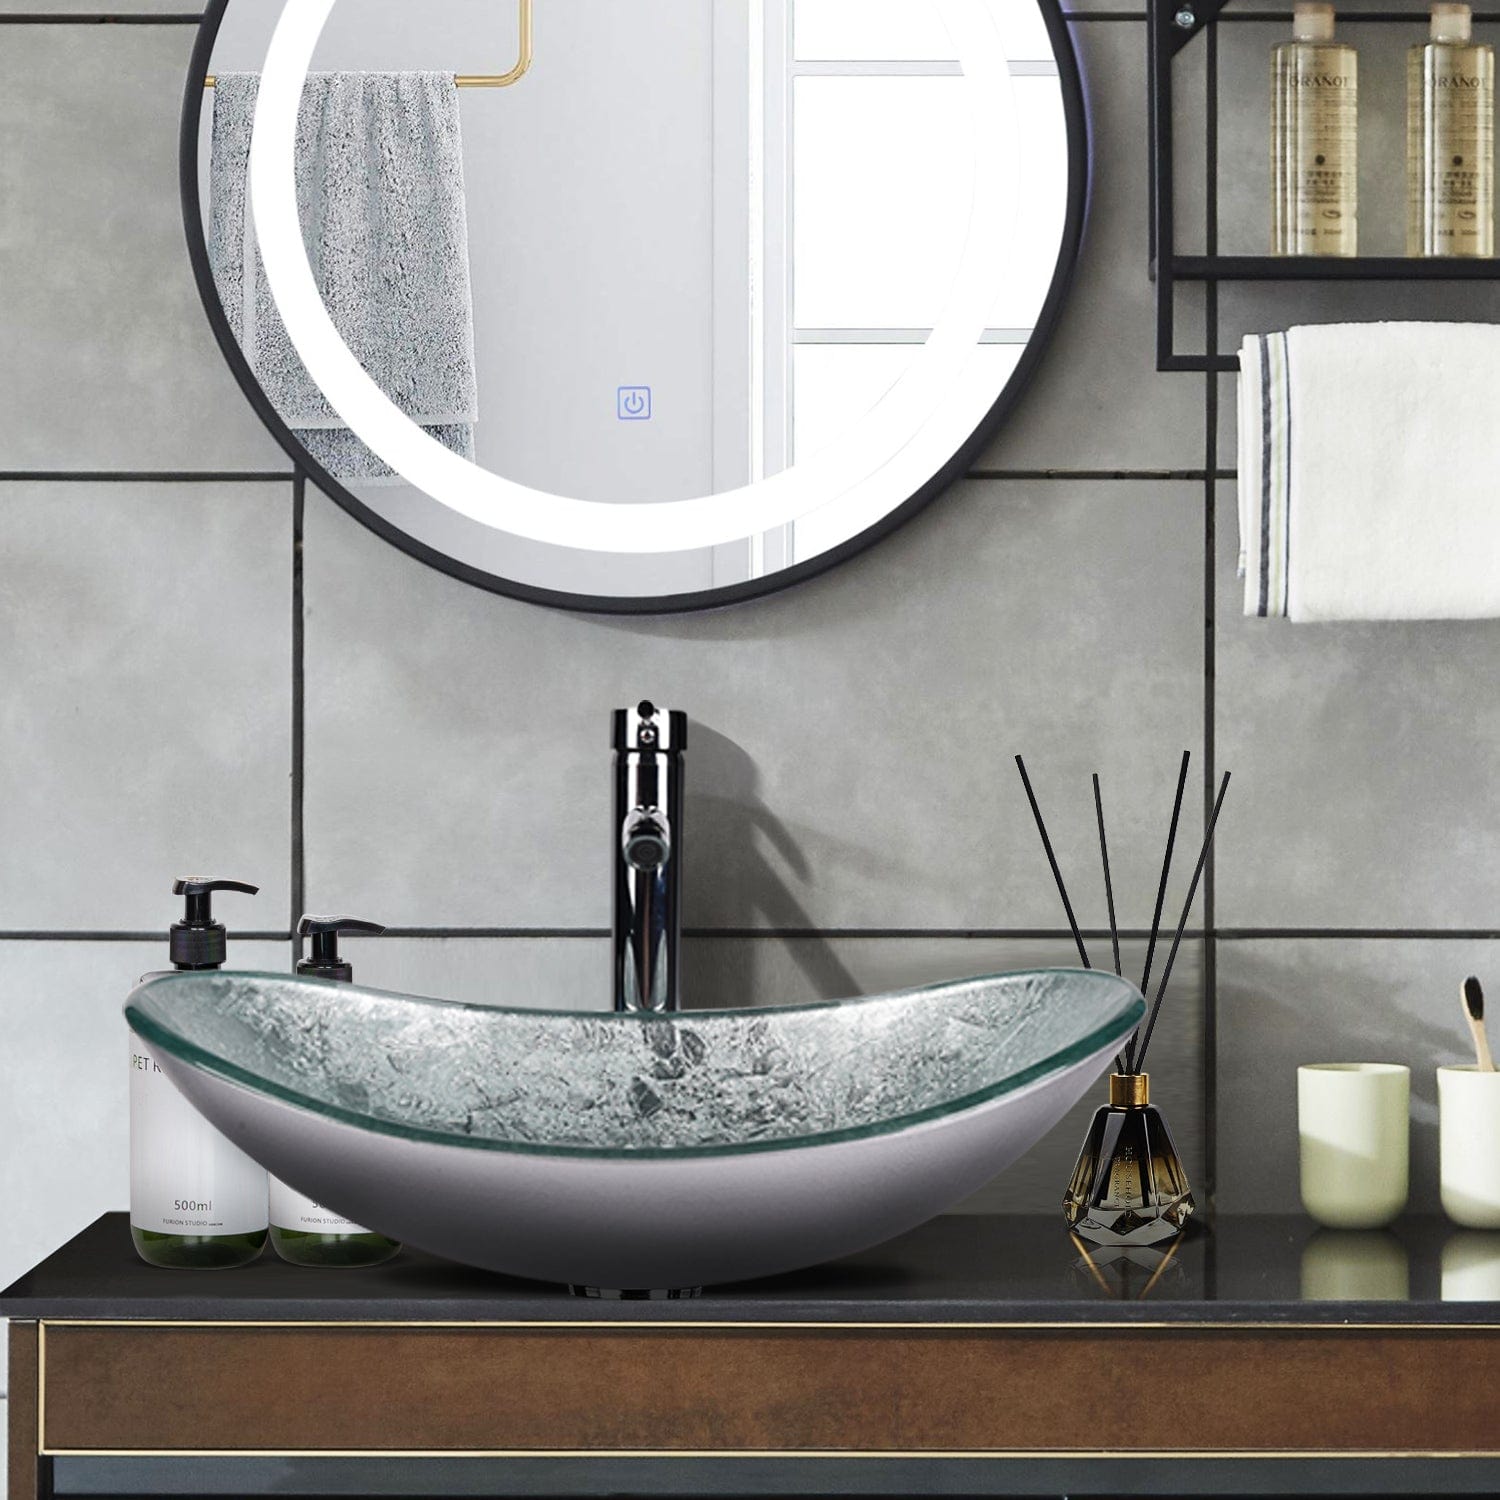 Elecwish Vessel Sinks Bathroom Artistic Glass Vessel Sink with Faucet Drain,Oval Silver